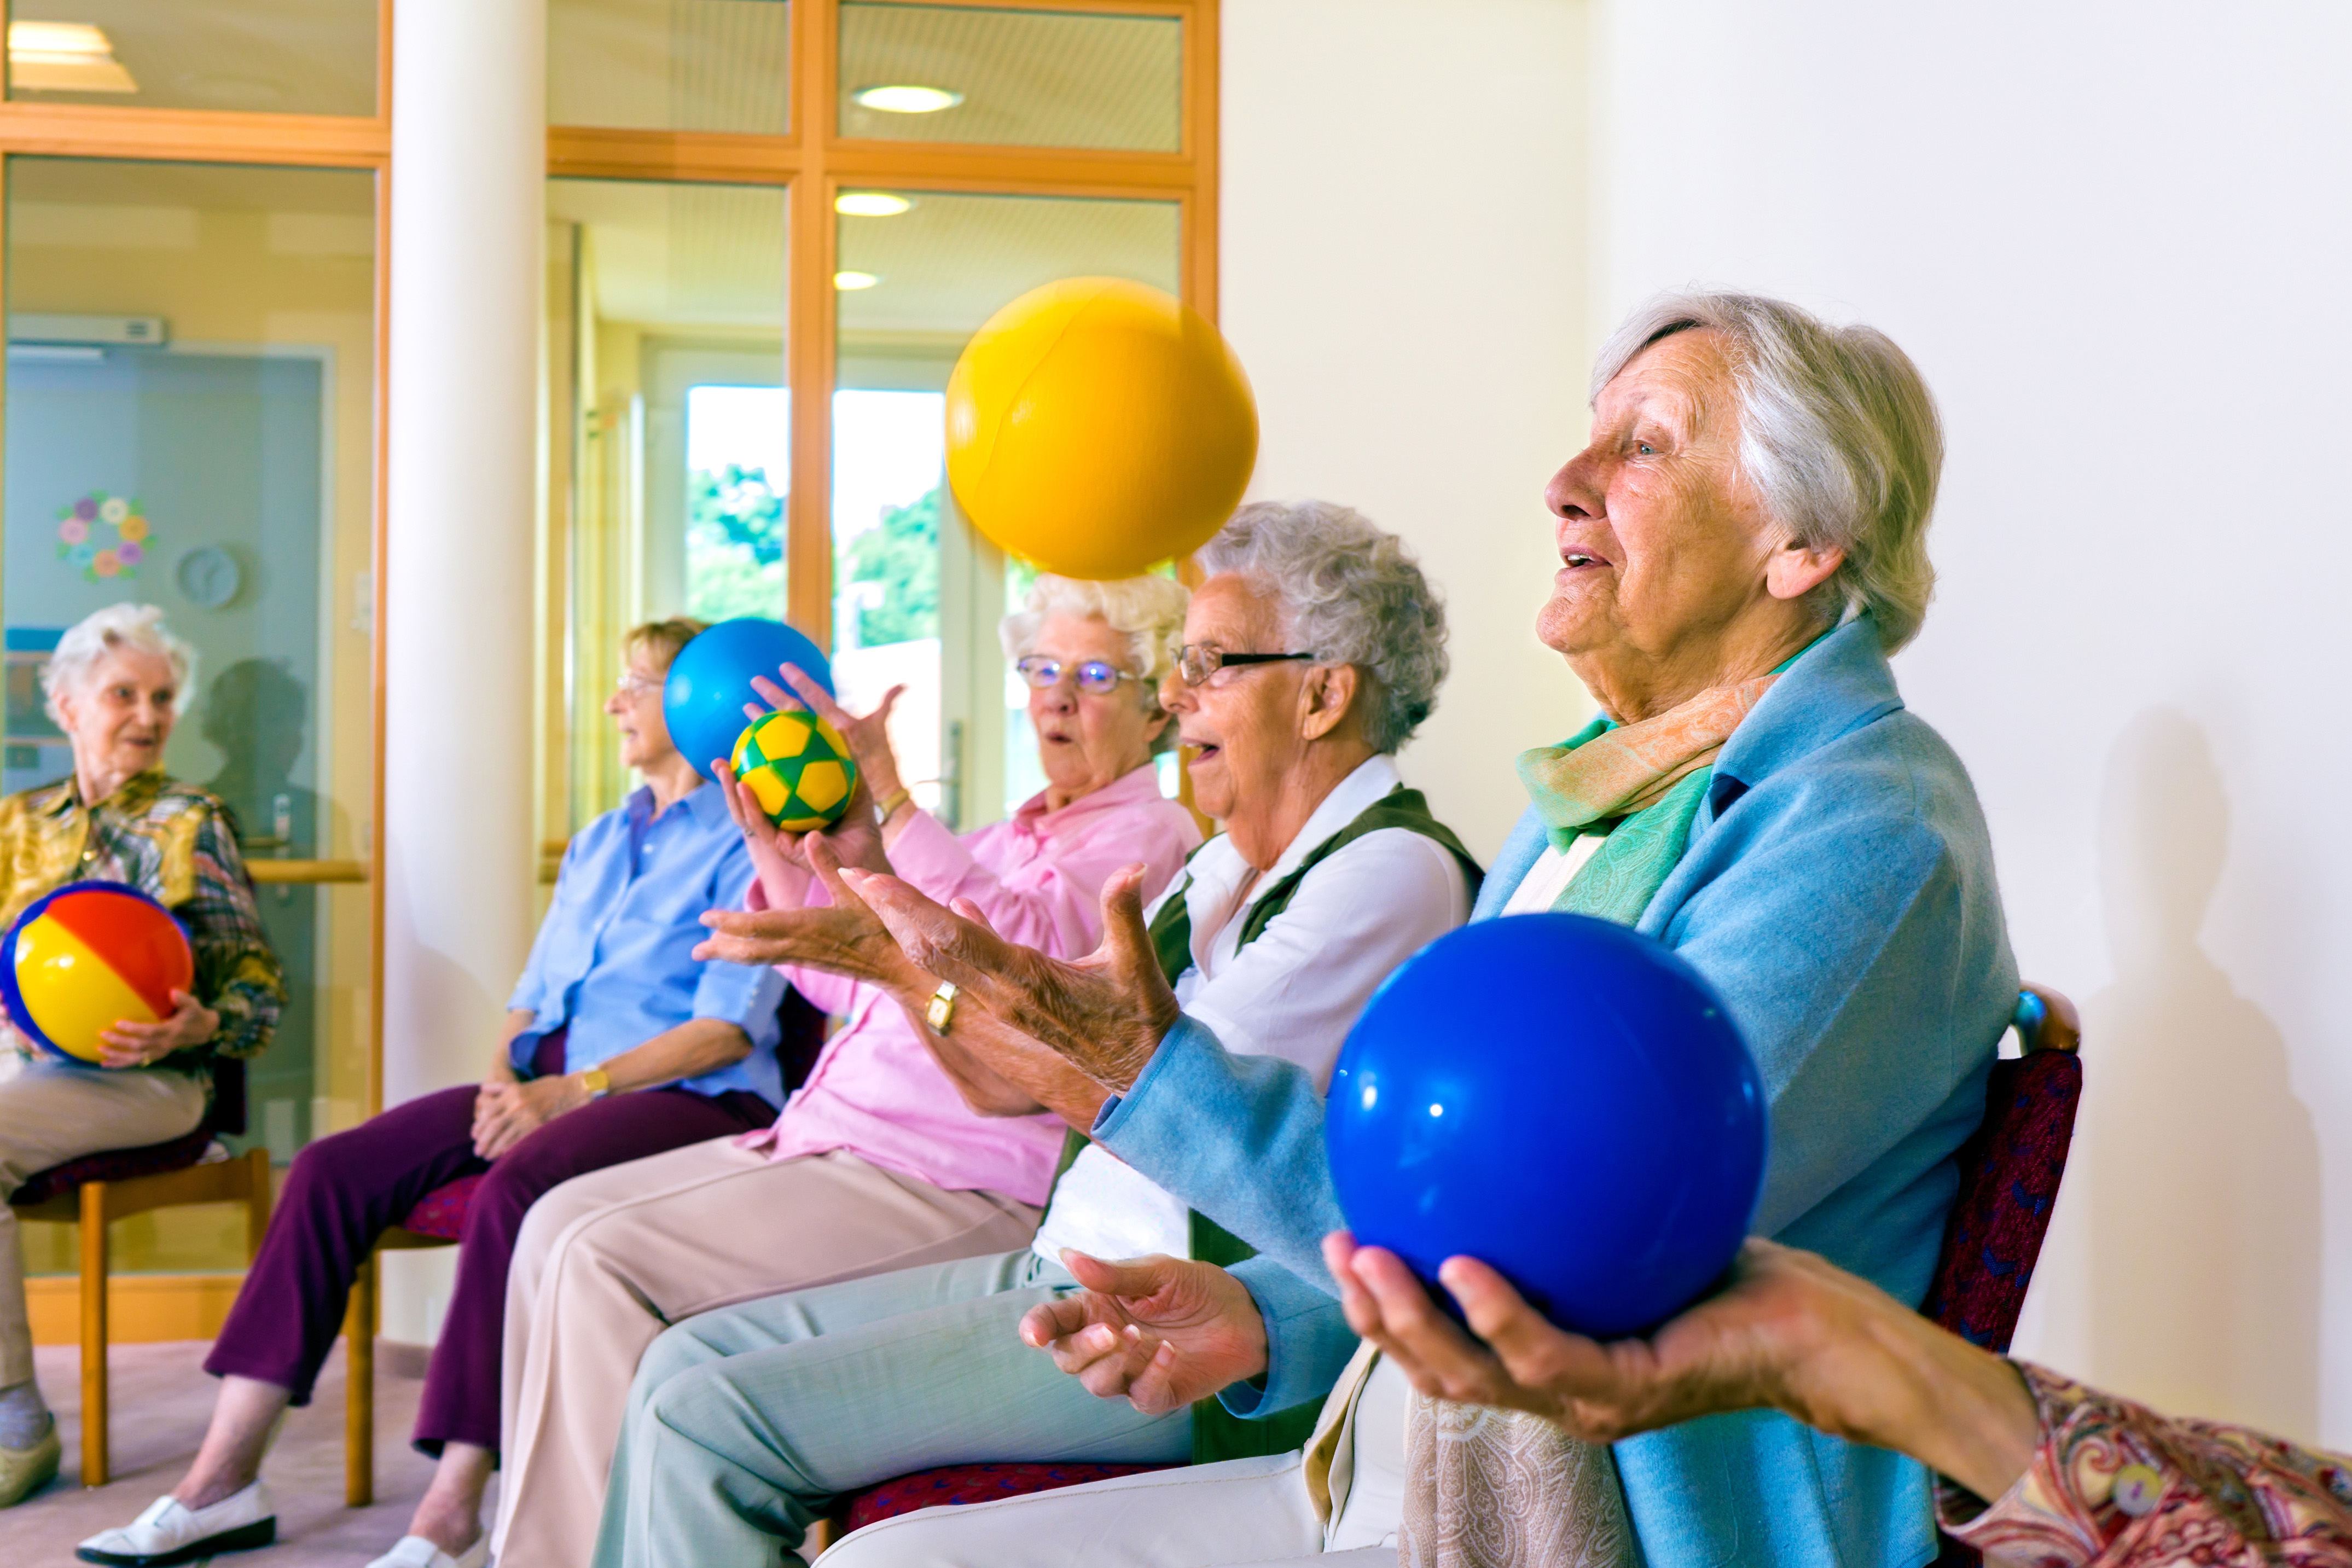 Group of happy senior ladies doing coordination exercises in a seniors gym sitting in chairs throwing and catching brightly colored balls